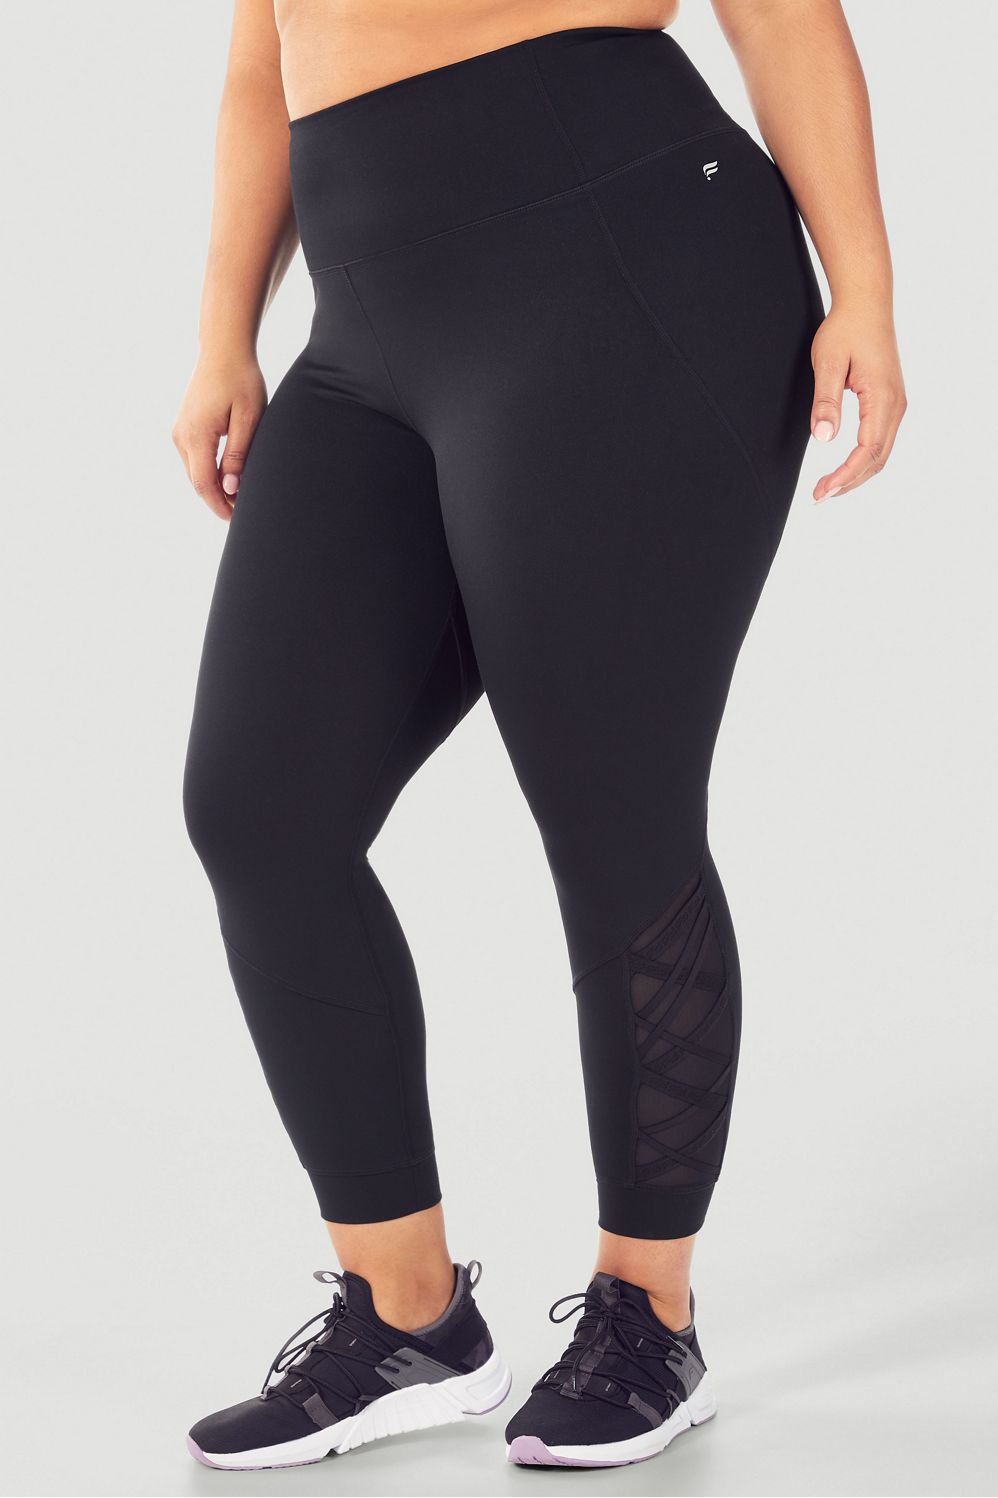 FABLETICS POWERHOLD DYNAMIC HIGH WAISTED LATTICE STRAPPY MESH 7/8 LEGGINGS  SMALL